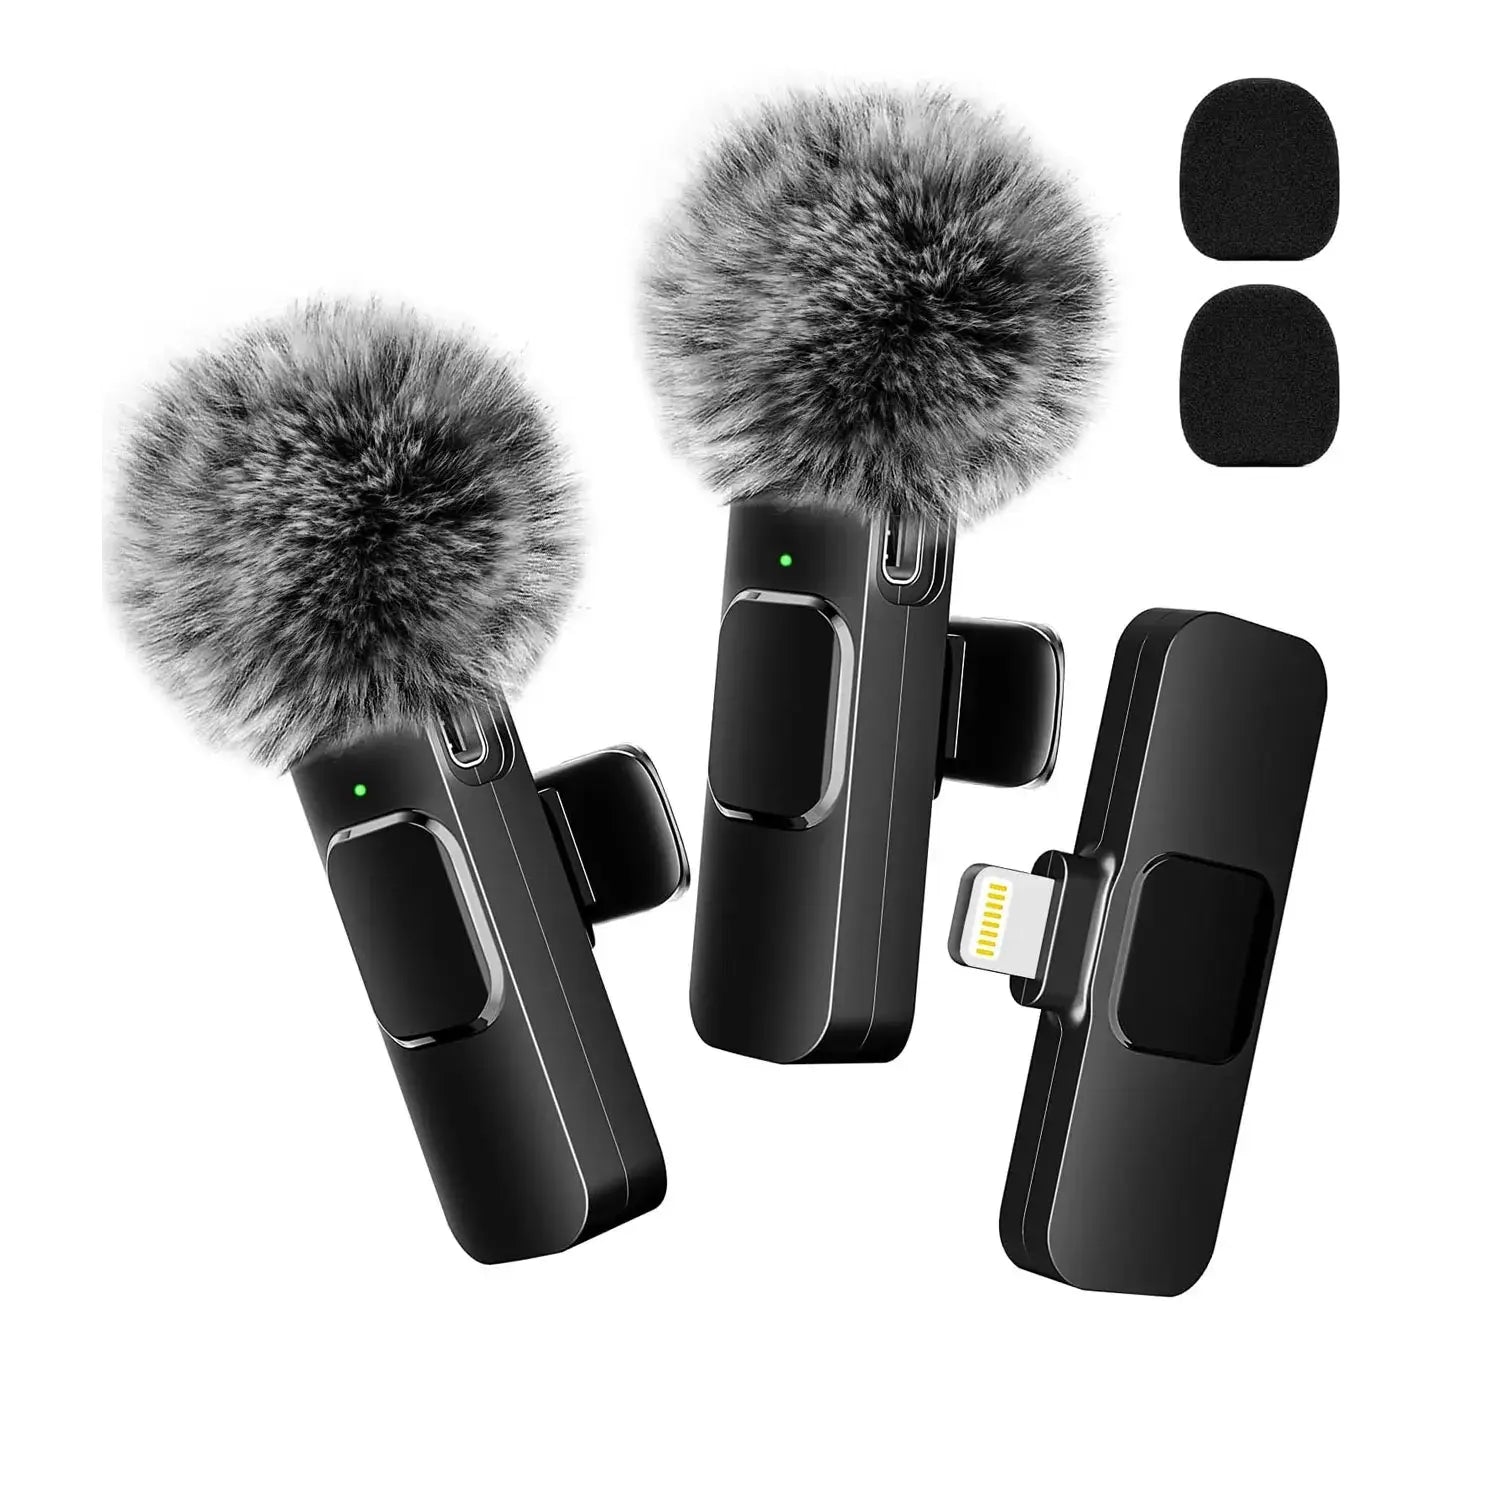 Rechargeable professional wireless microphone